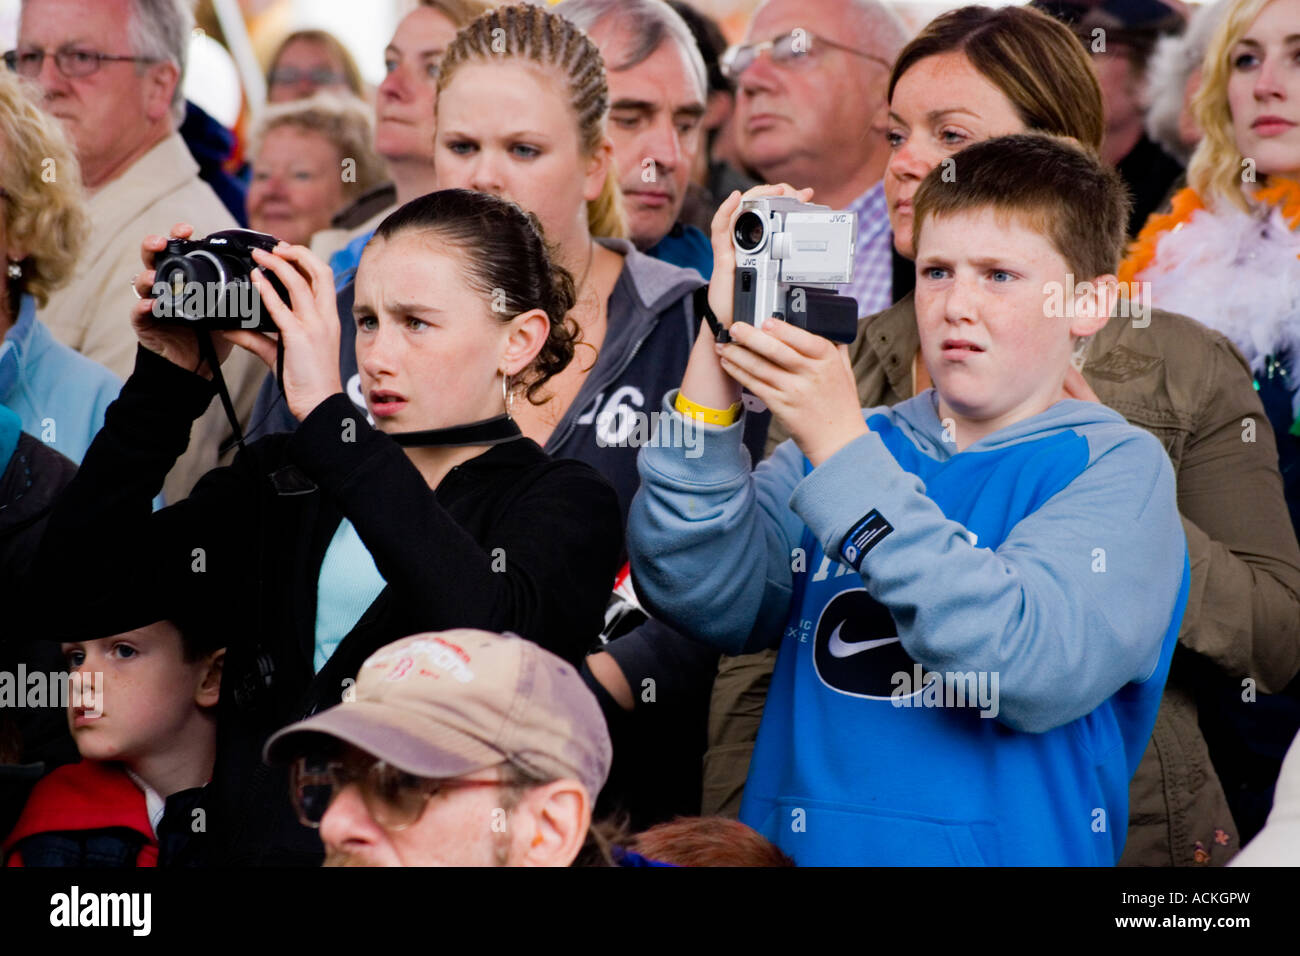 Boy and girl videoing and photographing live music concert, Ireland Stock Photo